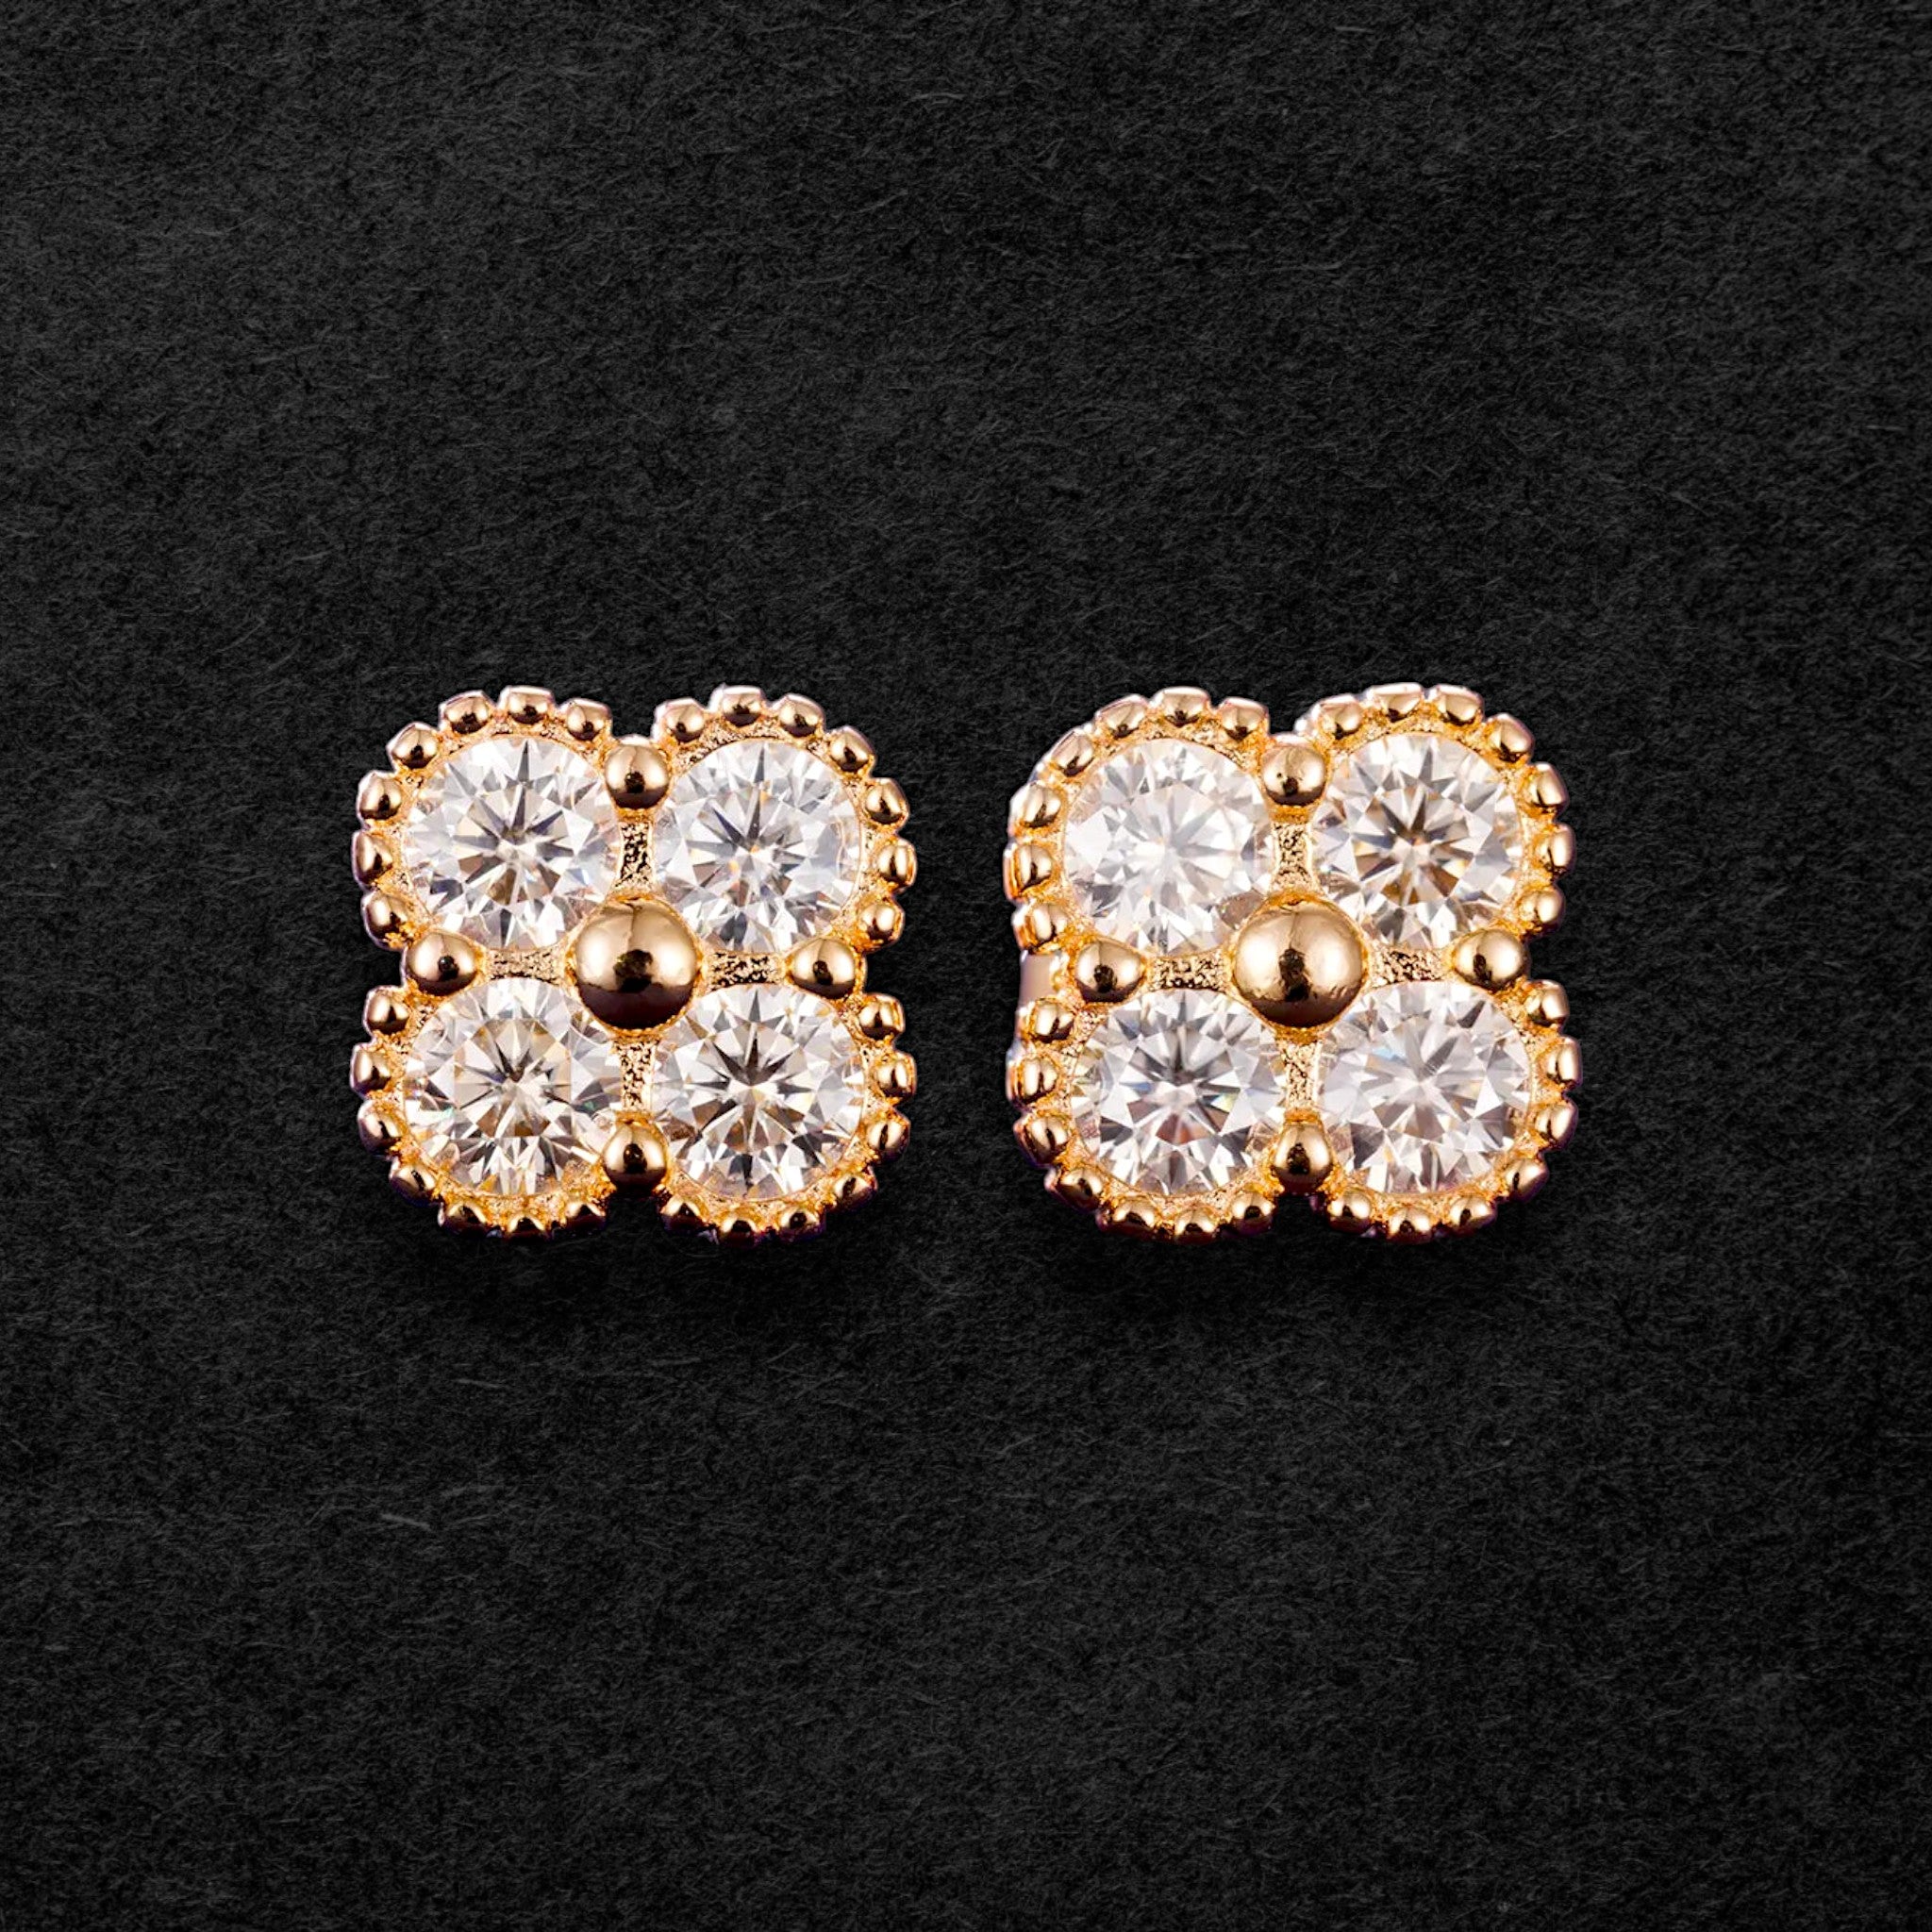 Exquisite Moissanite Floral Stud Earrings